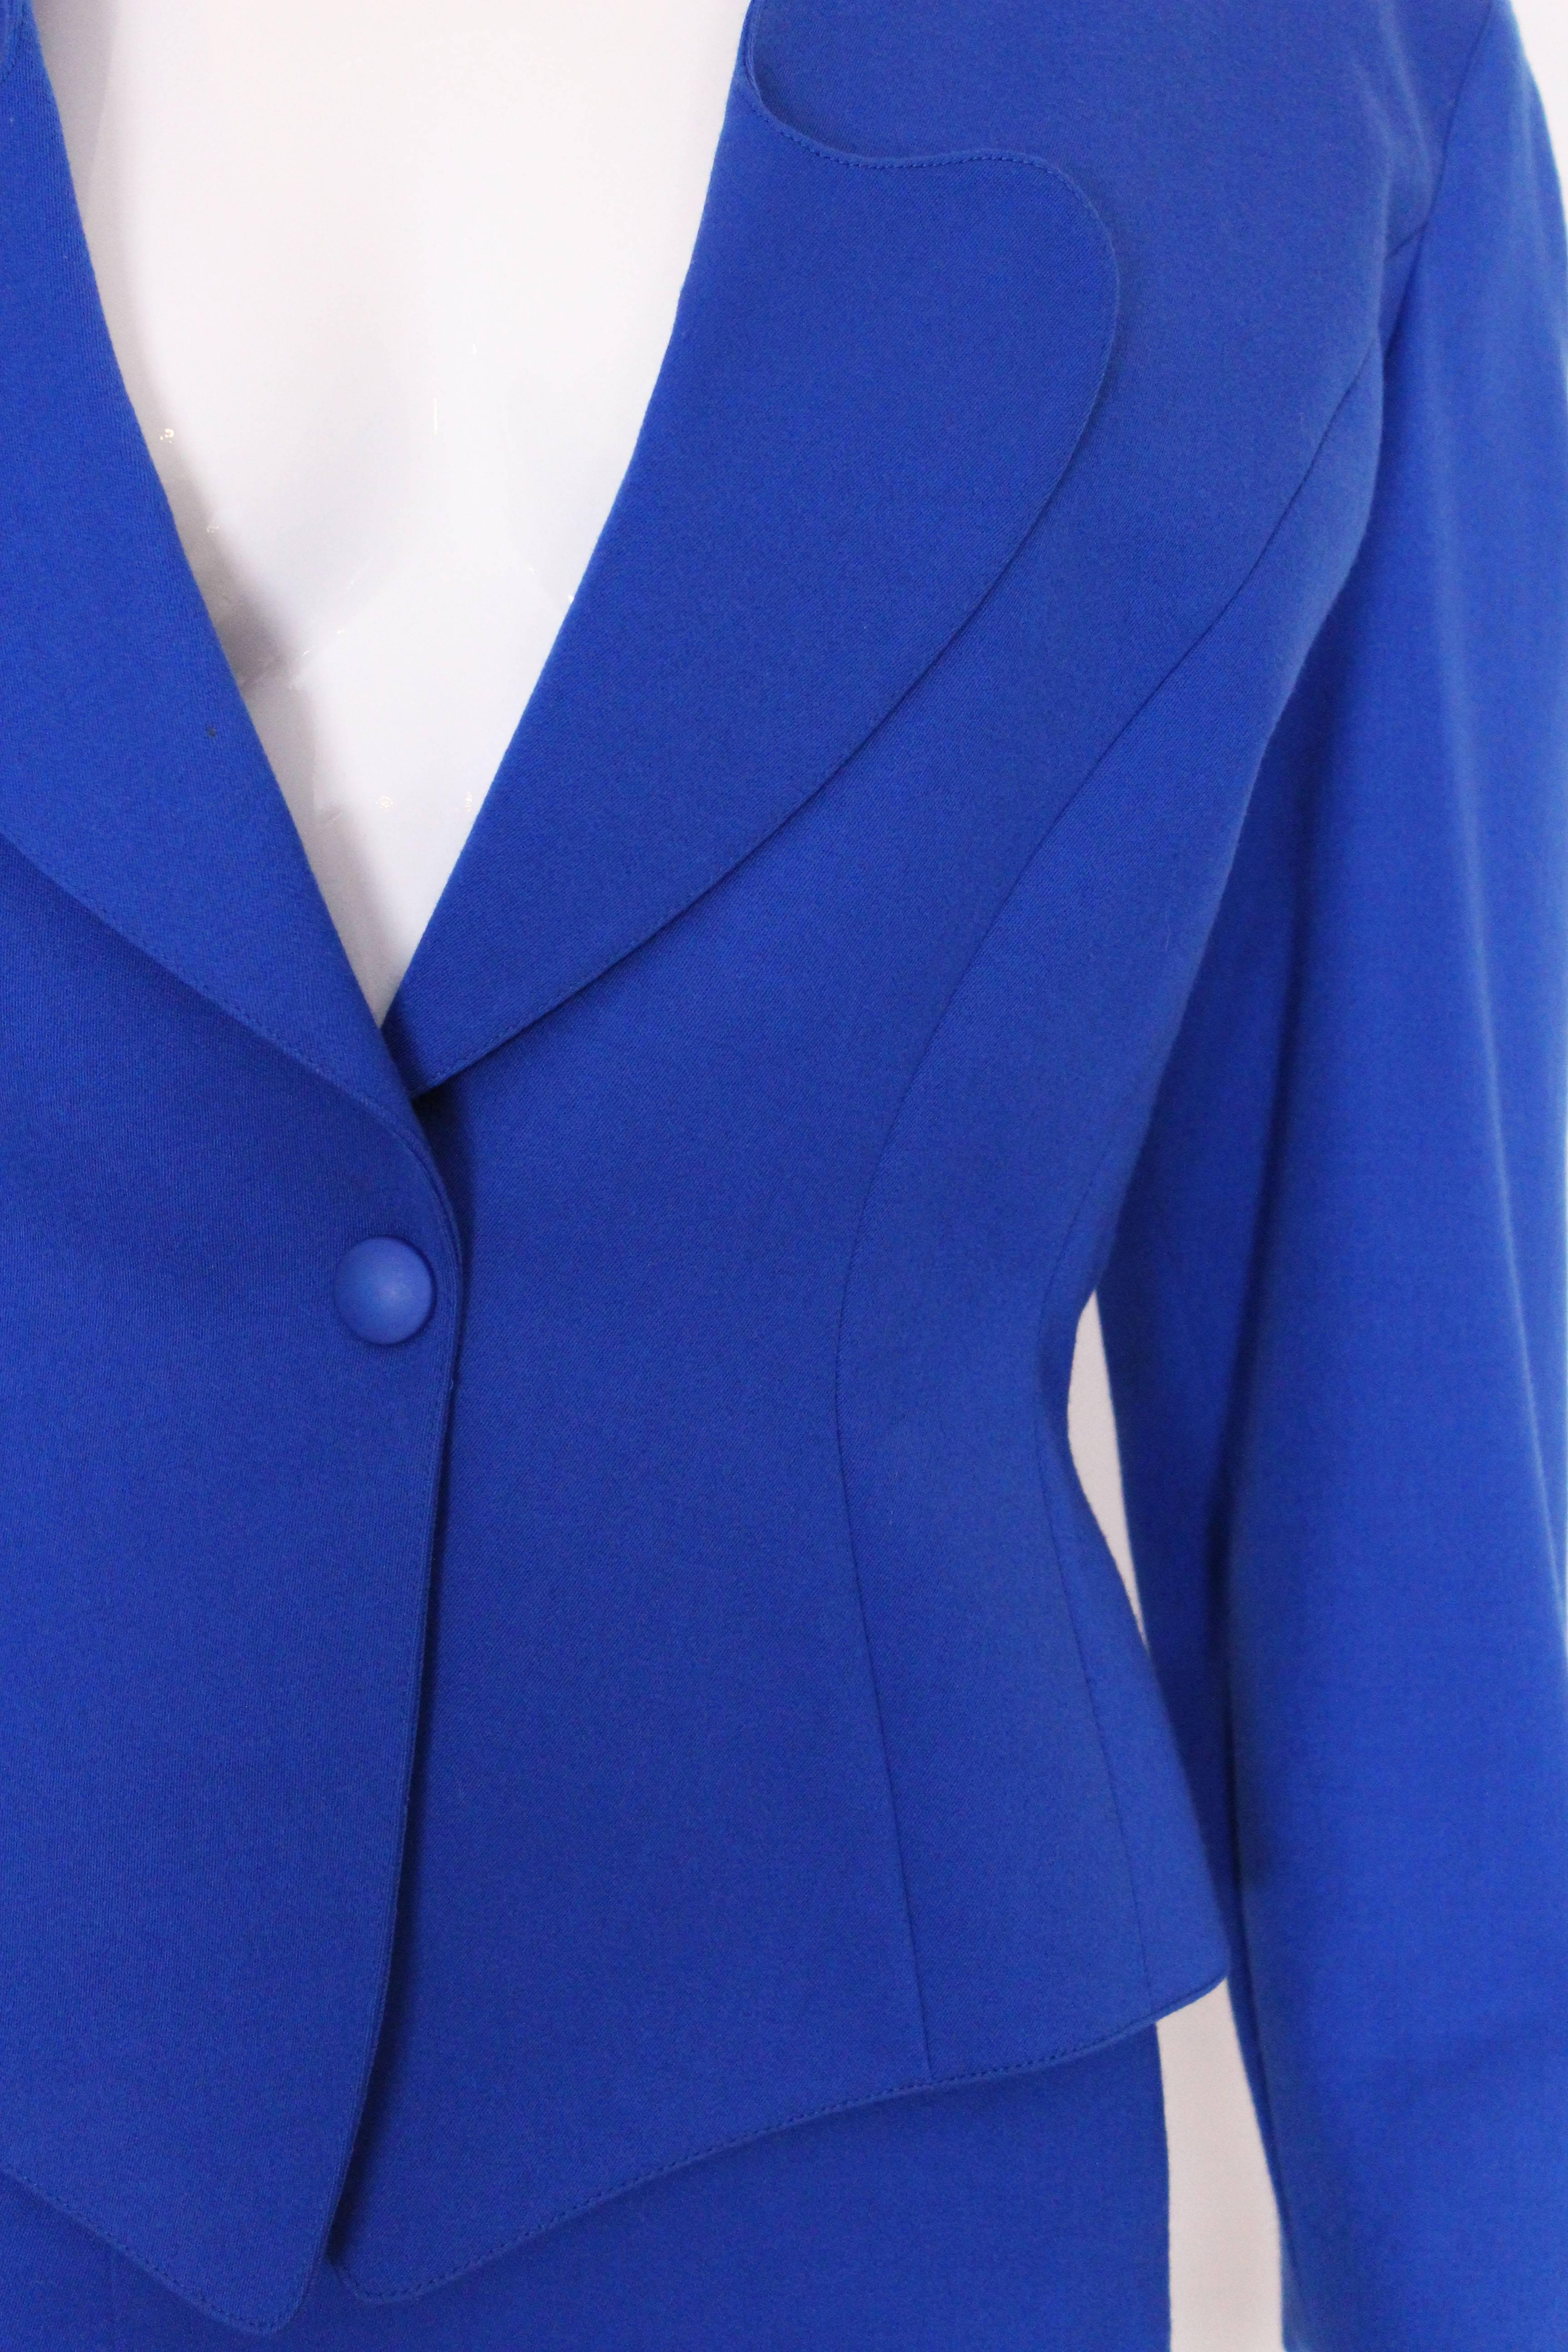 Vintage 1980s Electric Blue Suit jacket and skirt by Thierry Mugler 2